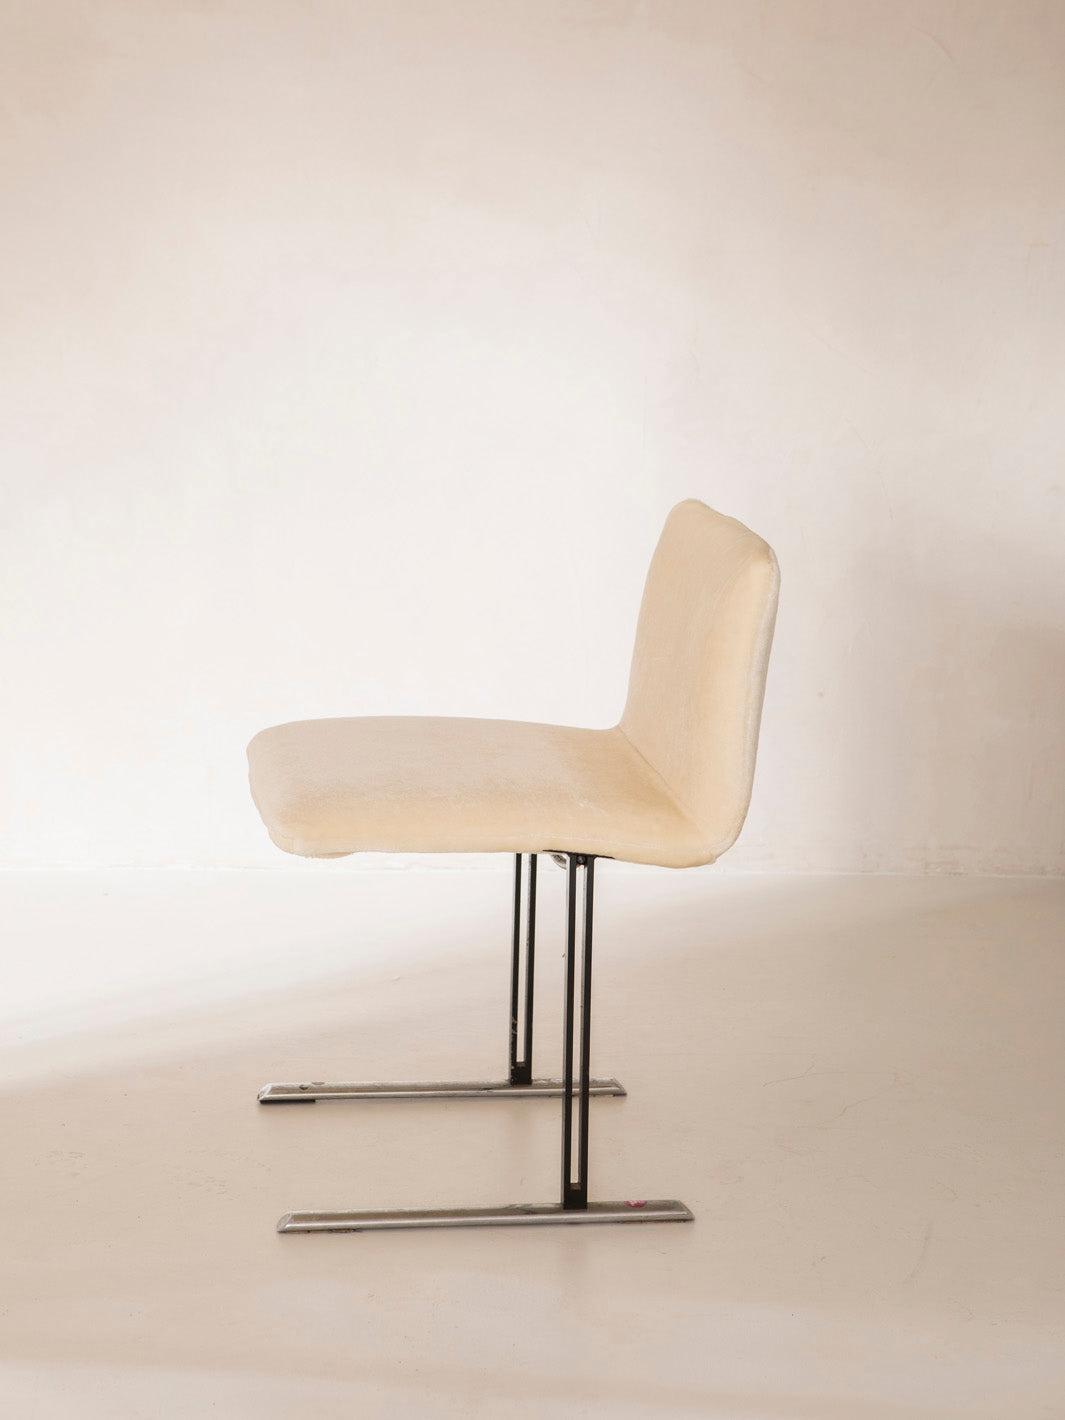 Saporetti chair designed by Offredi from the 70s